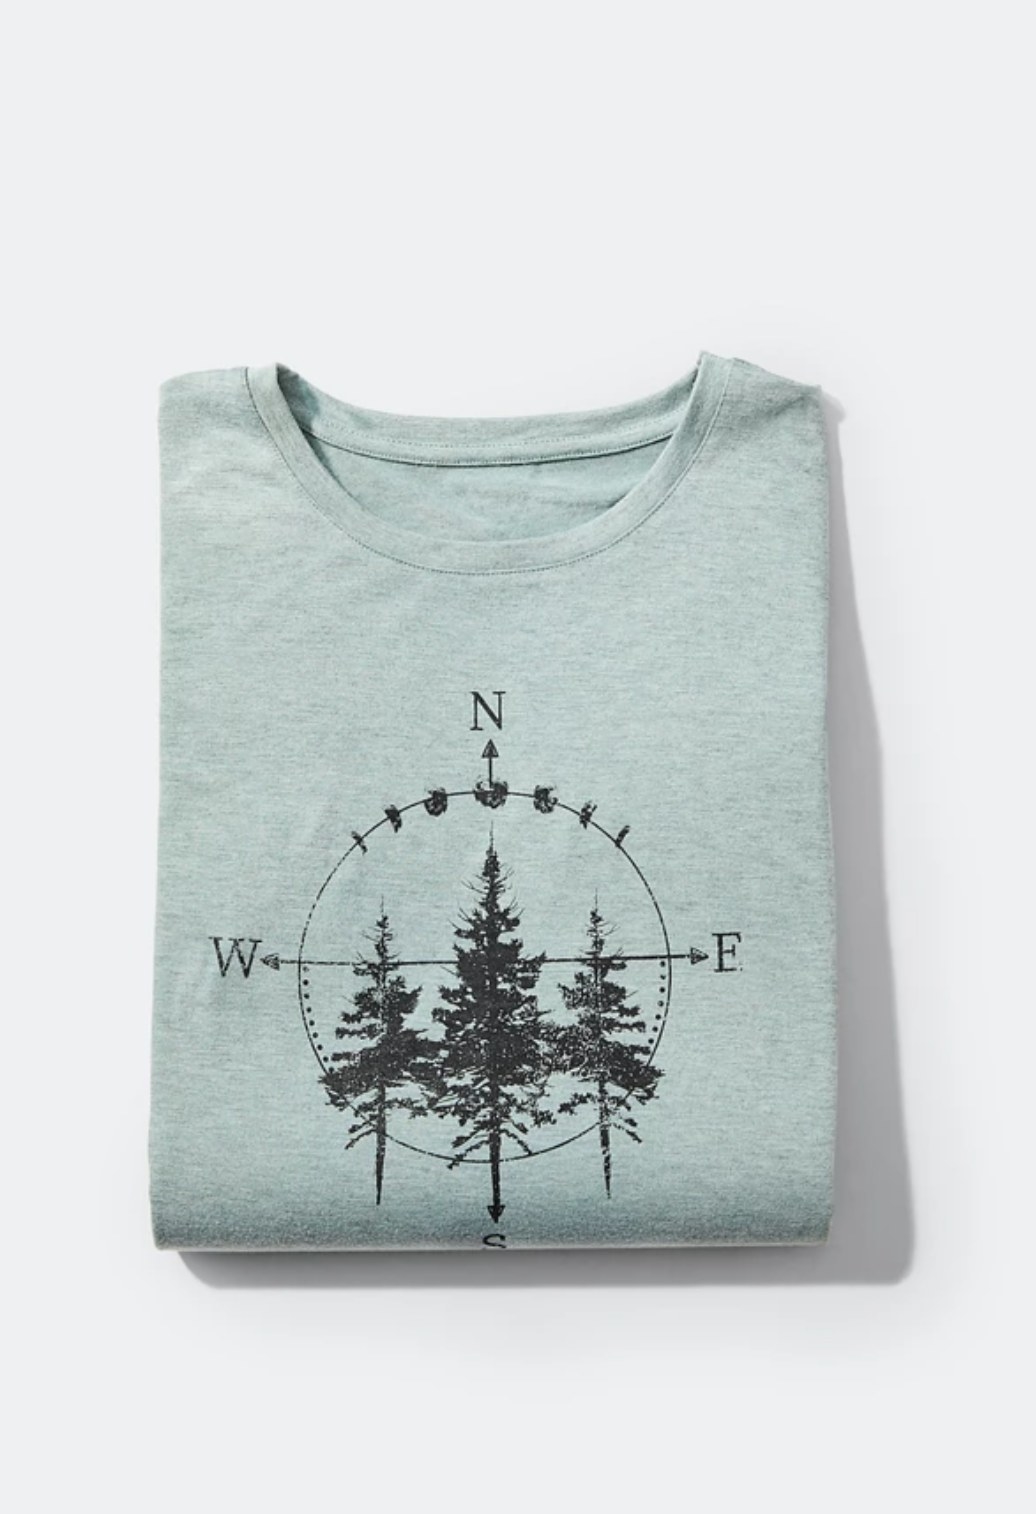 the min shirt with three trees and a compass over them